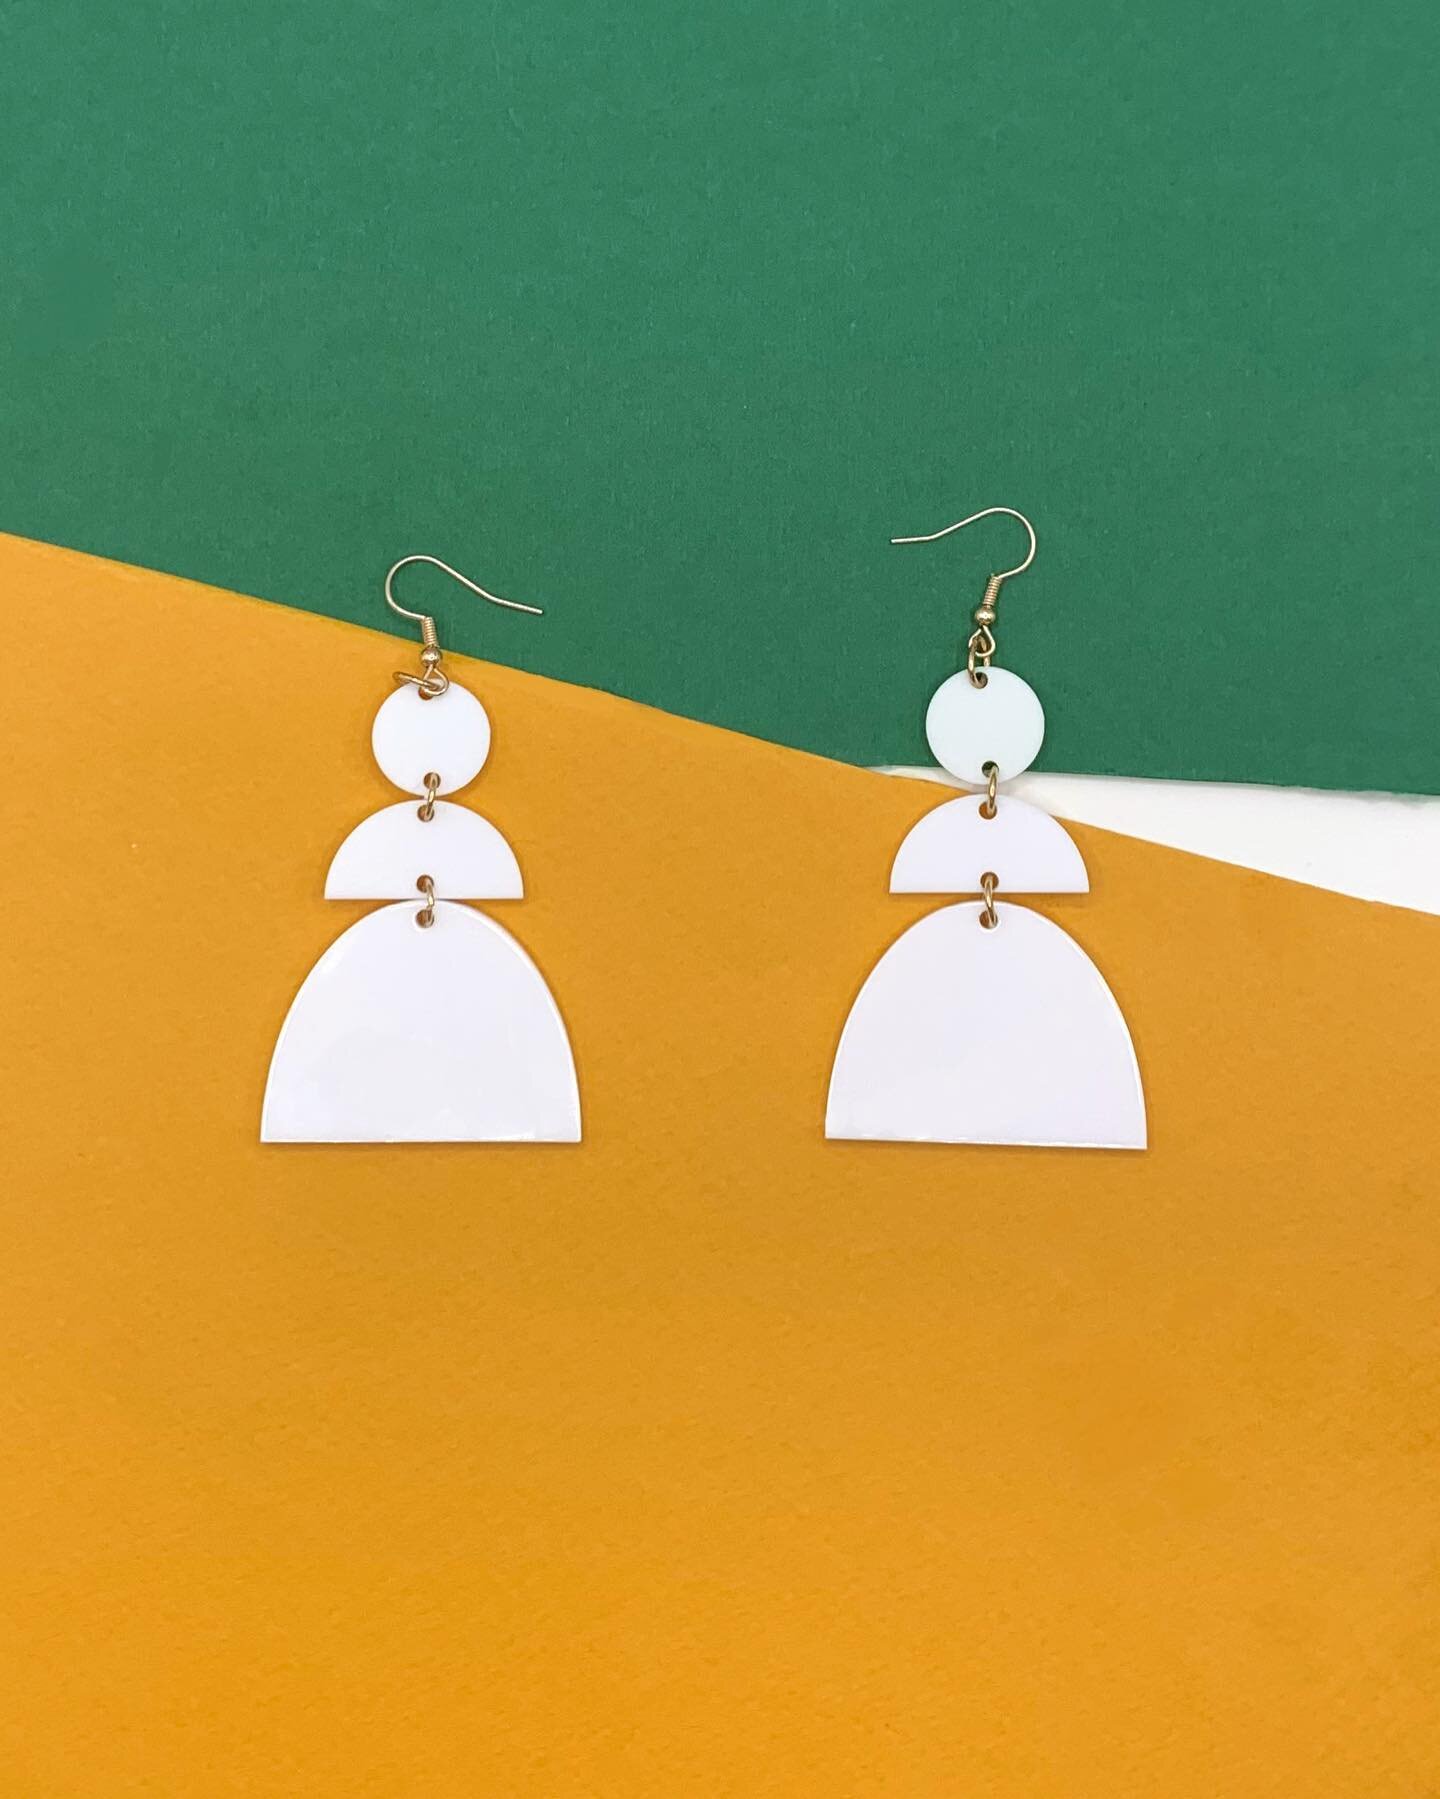 🔶Earrings🔶

There are lots of new designs up on our Etsy - including this shapely number.

Swipe for more potential colour options.

&mdash;&mdash;-

Etsy shop link found in bio.

🪴